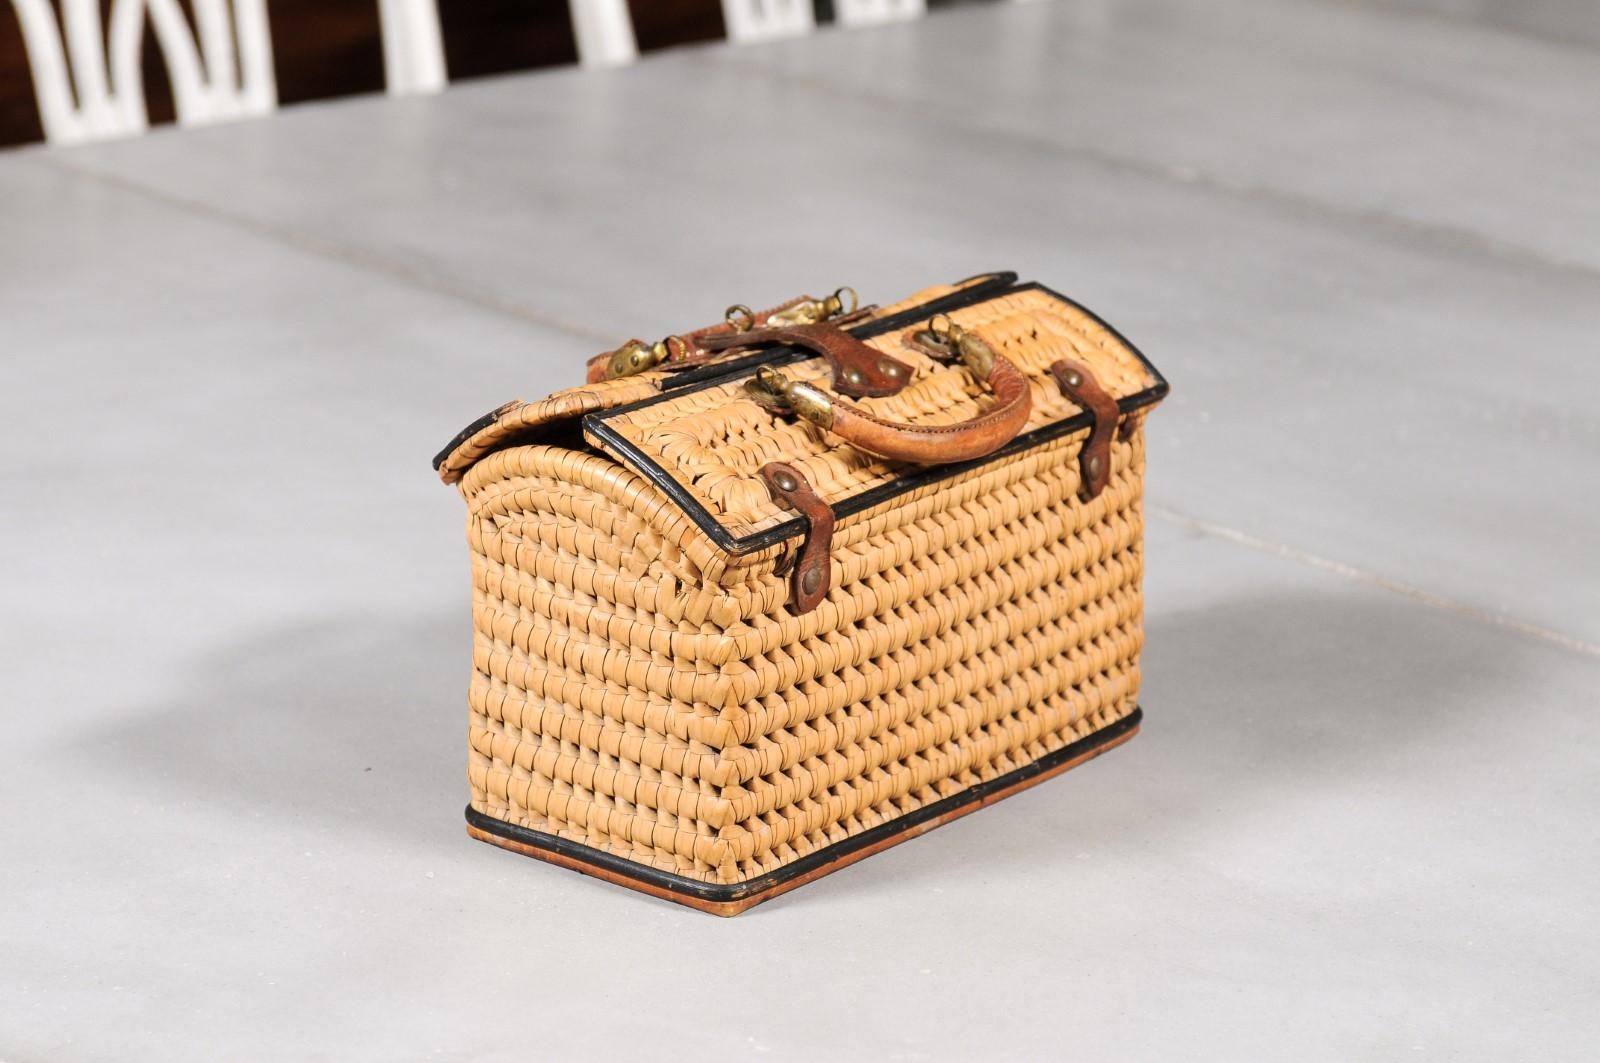 19th Century Swedish, 1890s Rustic Rectangular Lidded Wicker and Leather Basket with Handles